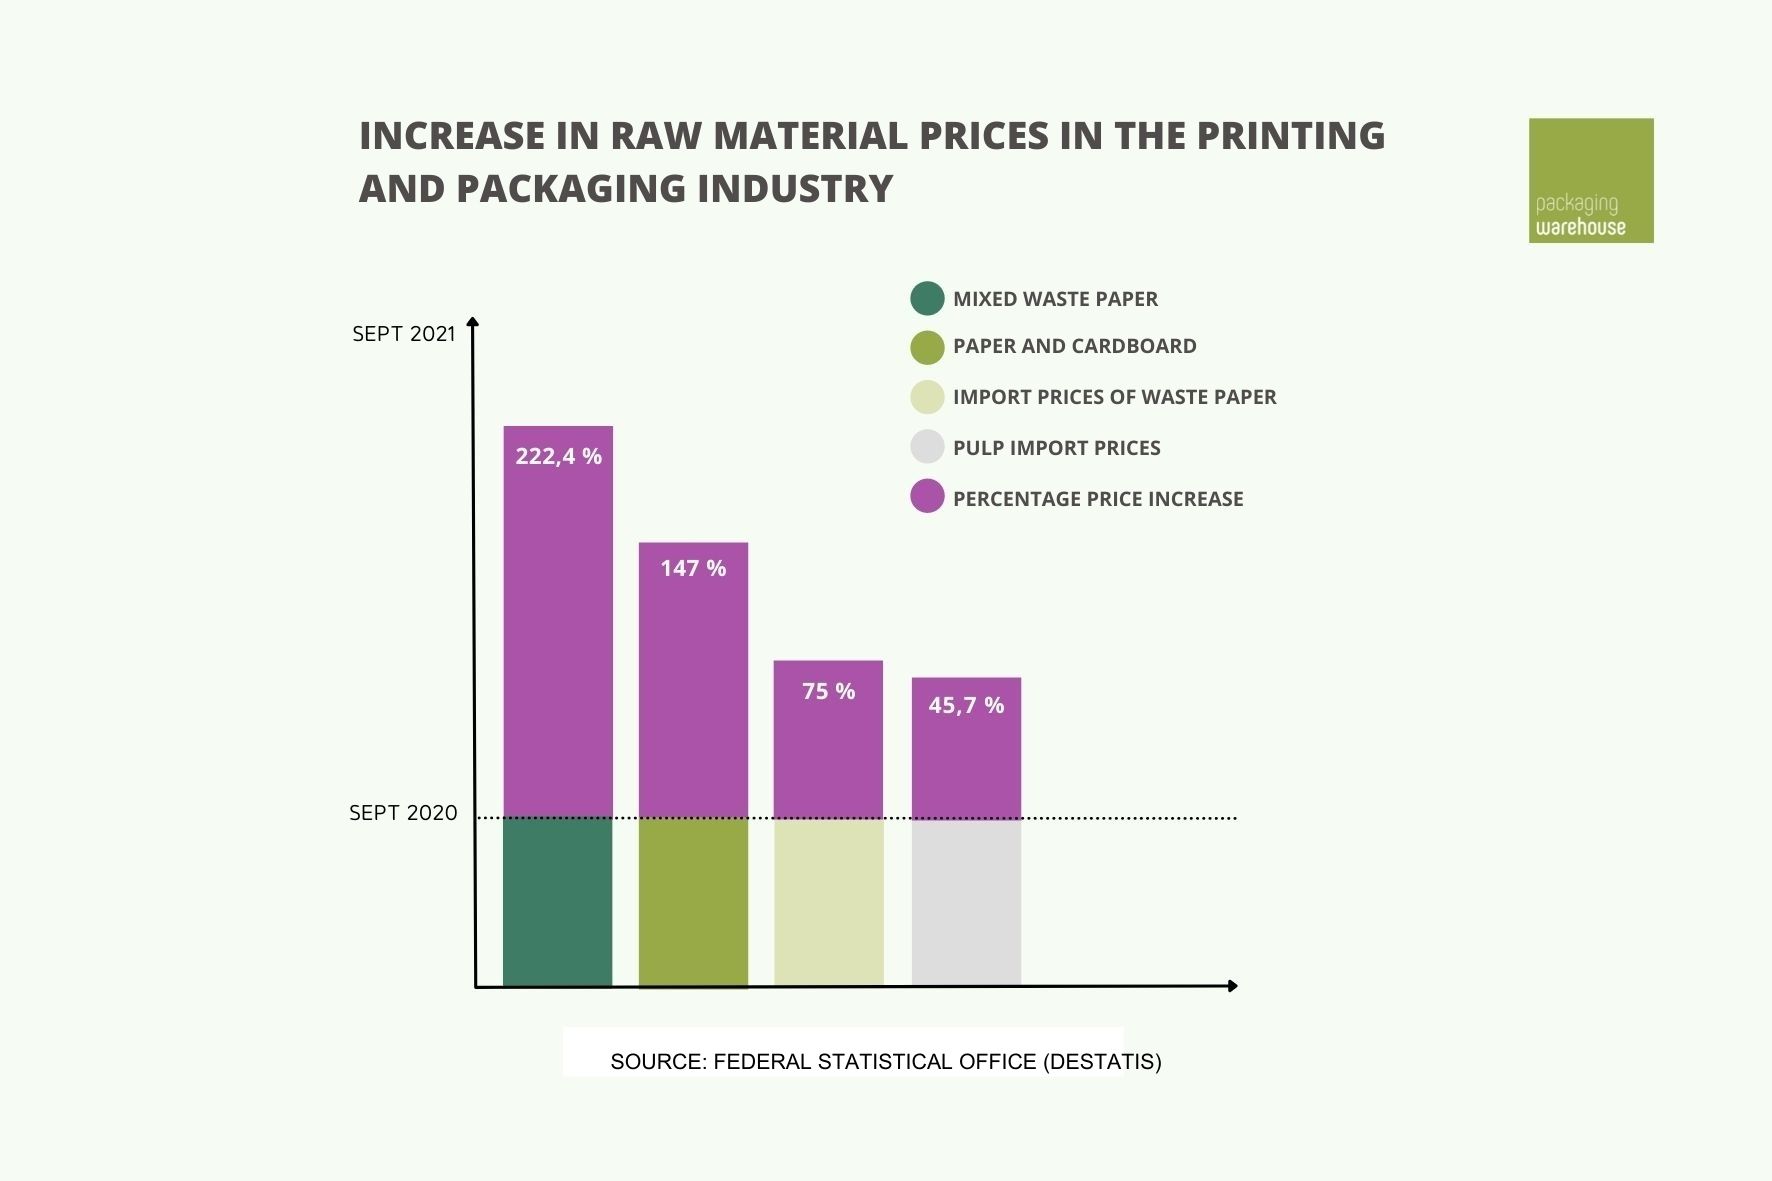 Chart shows rising prices for raw materials in the printing and packaging industry